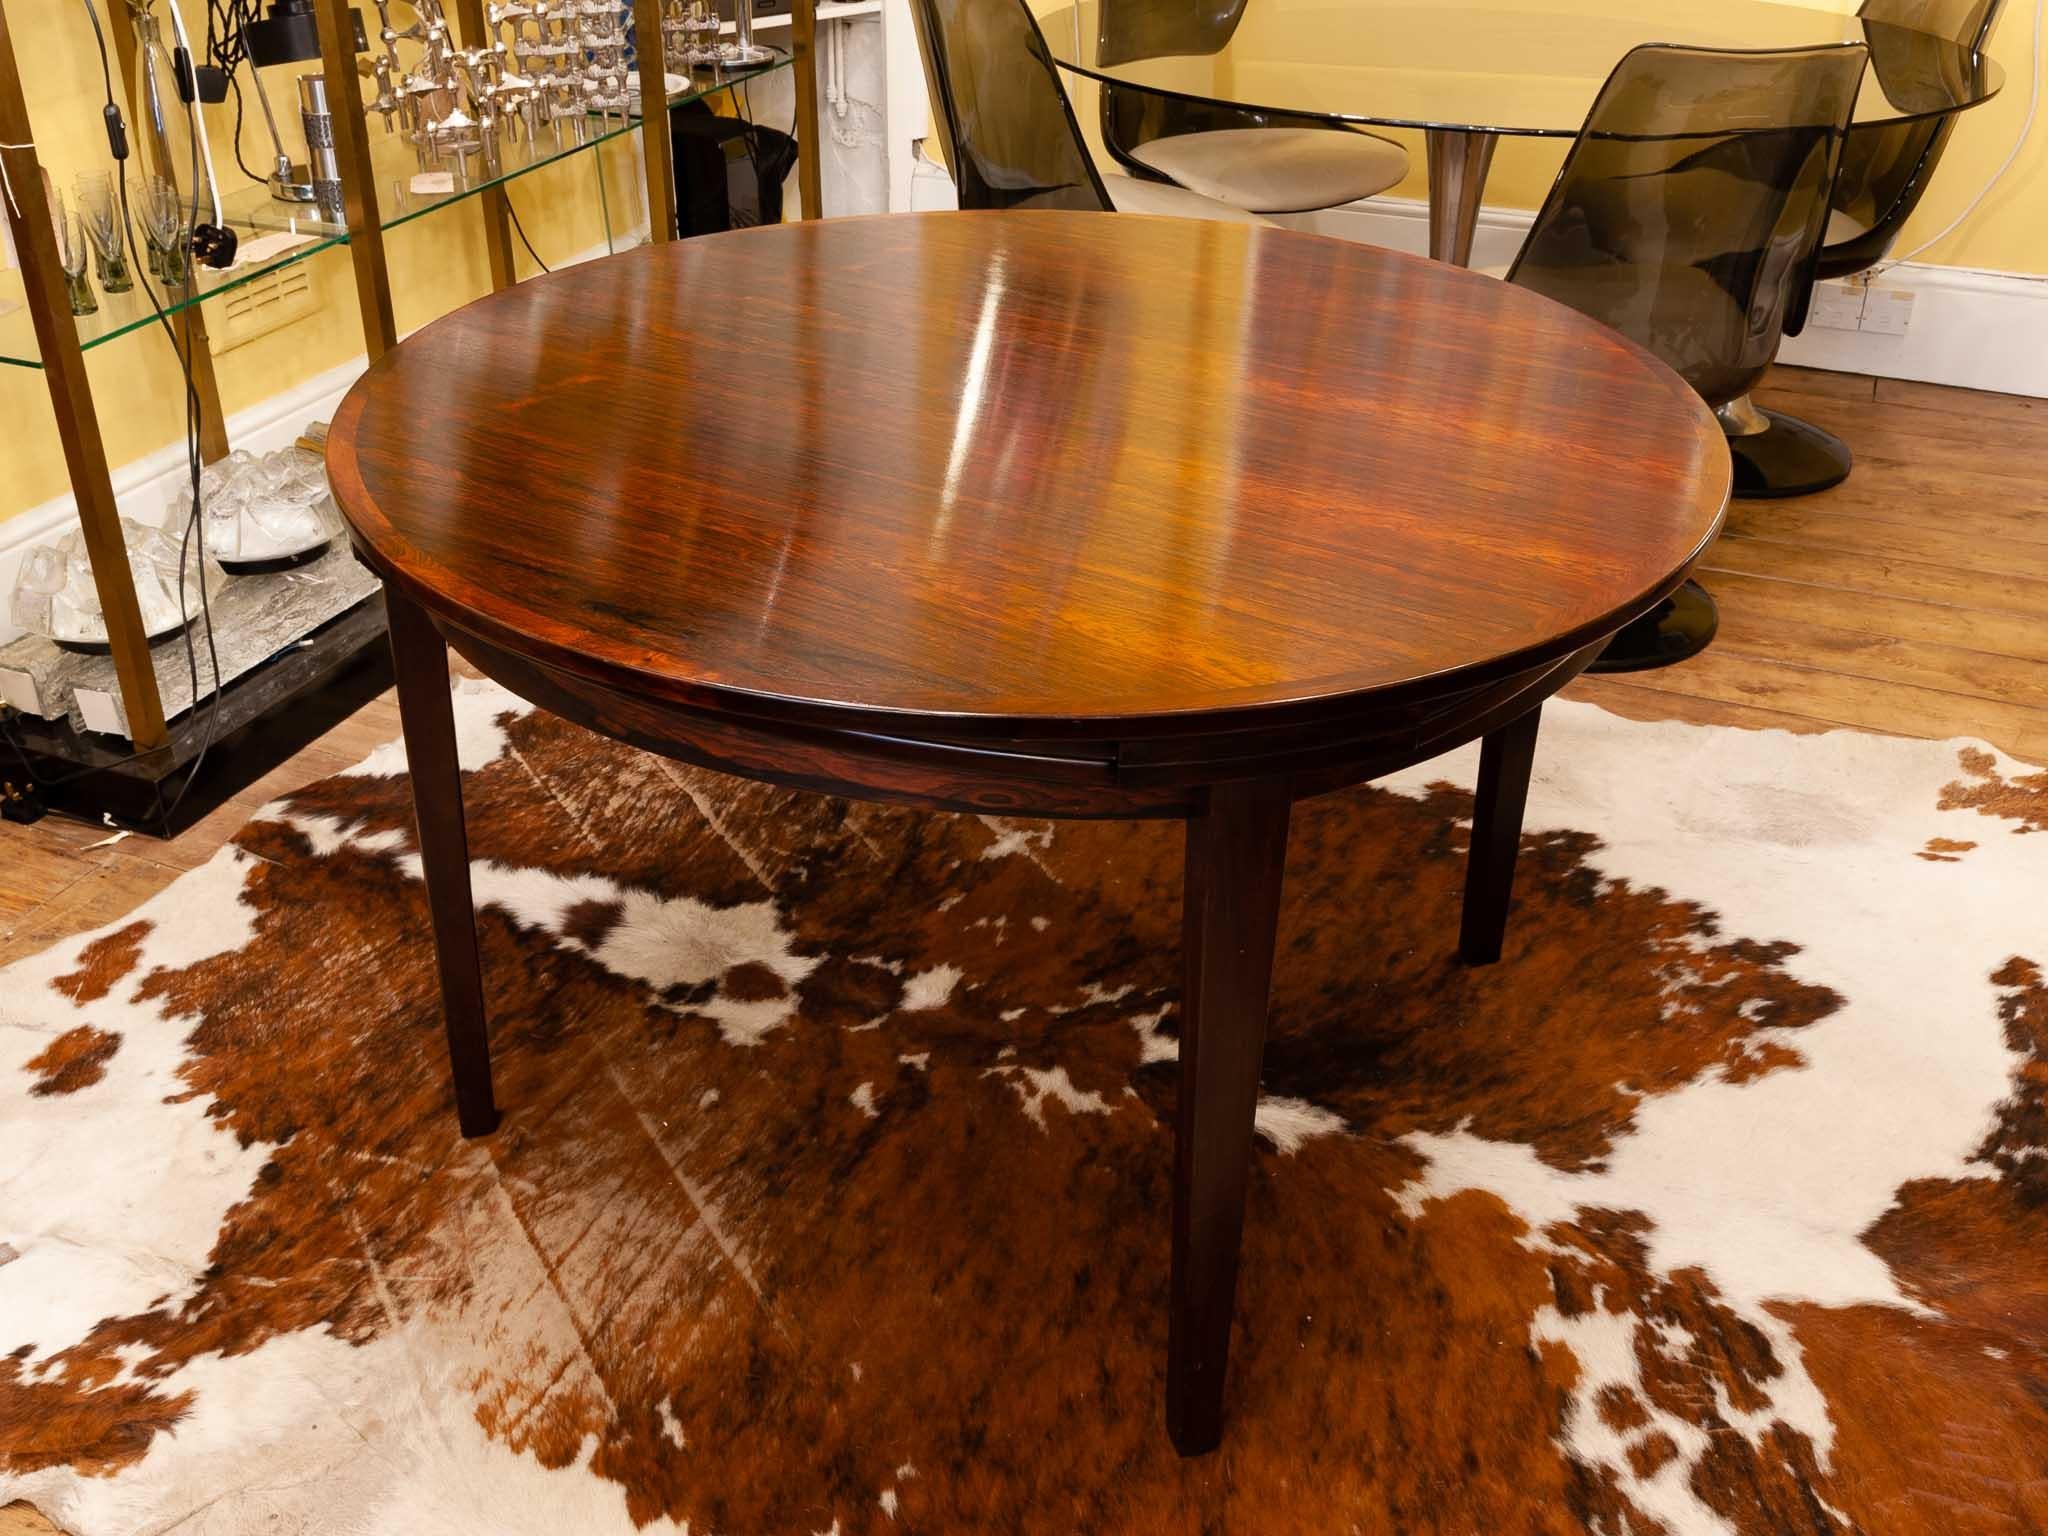 Danish Rosewood Flip-Flap Lotus dining table manufactured by Dyrlund in the 1960s. The table is their version with four legs with a wide diameter of 1.2m when not extended. The four 'flip-flap' extension leaves slide neatly underneath the table-top